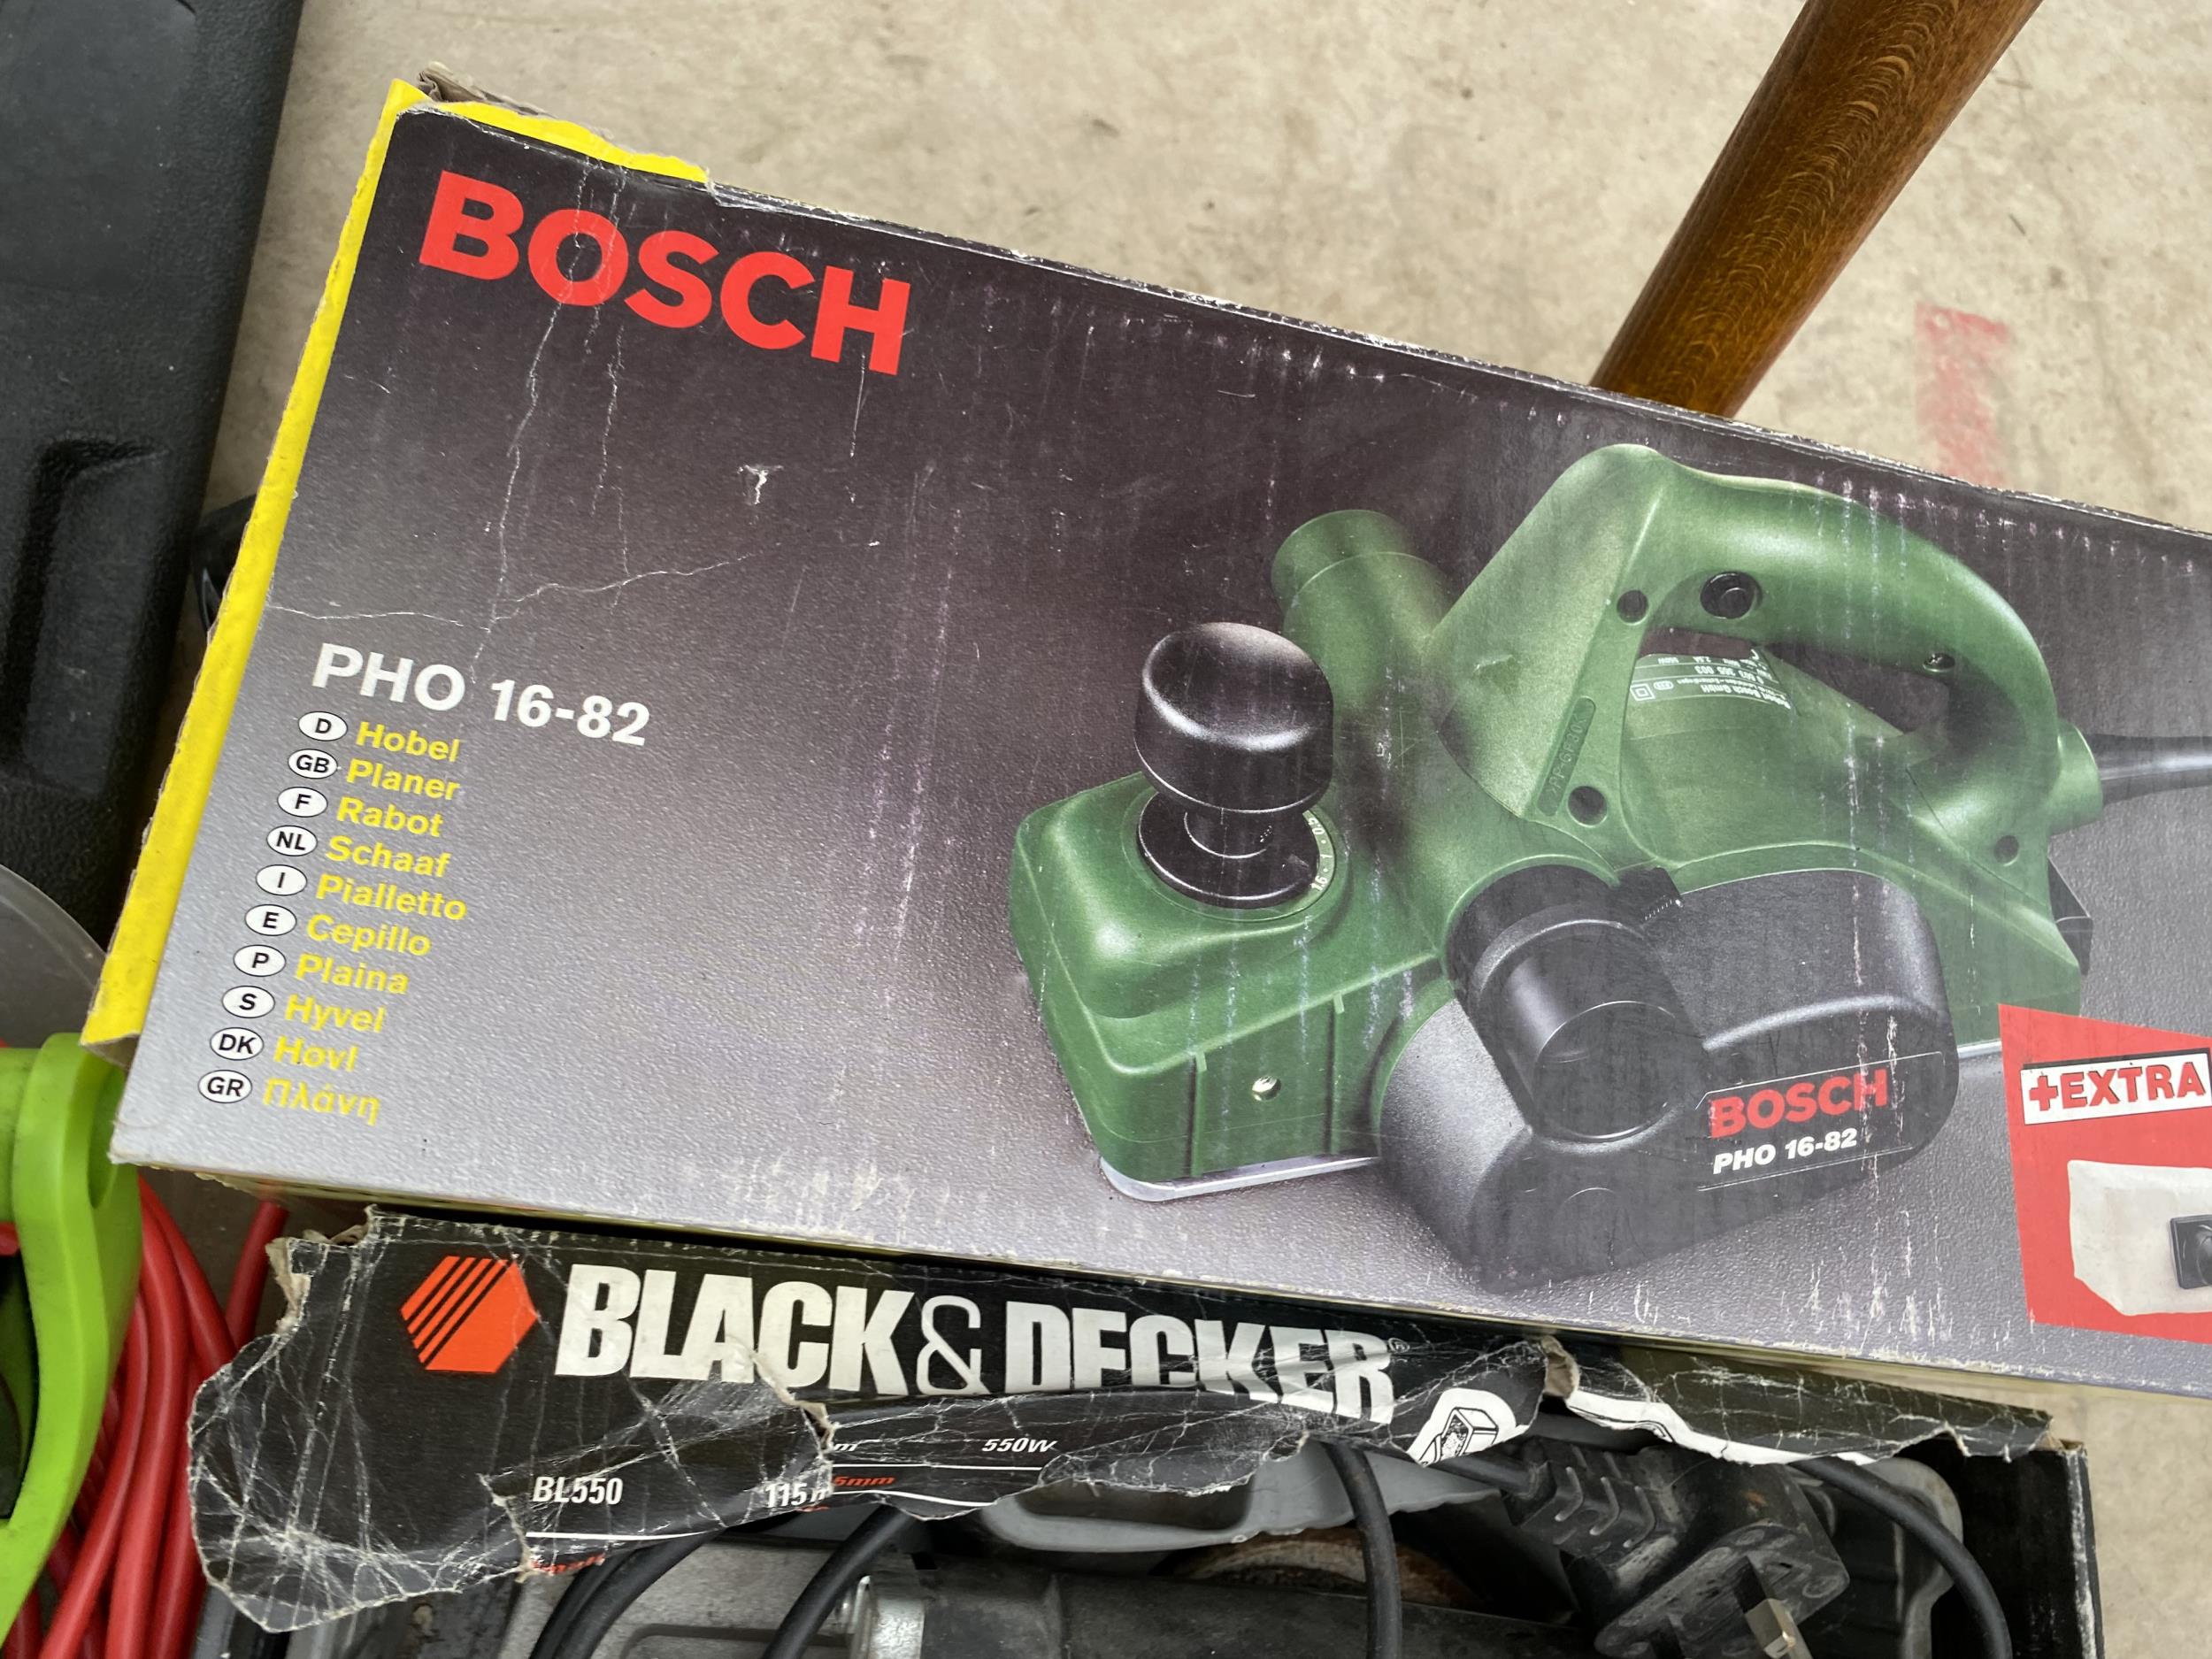 AN ASSORTMENT OF POWER TOOLS TO INCLUDE A BOSCH DETAIL SANDER, BOSCH ELECTRIC PLANE AND A BLACK - Image 5 of 5